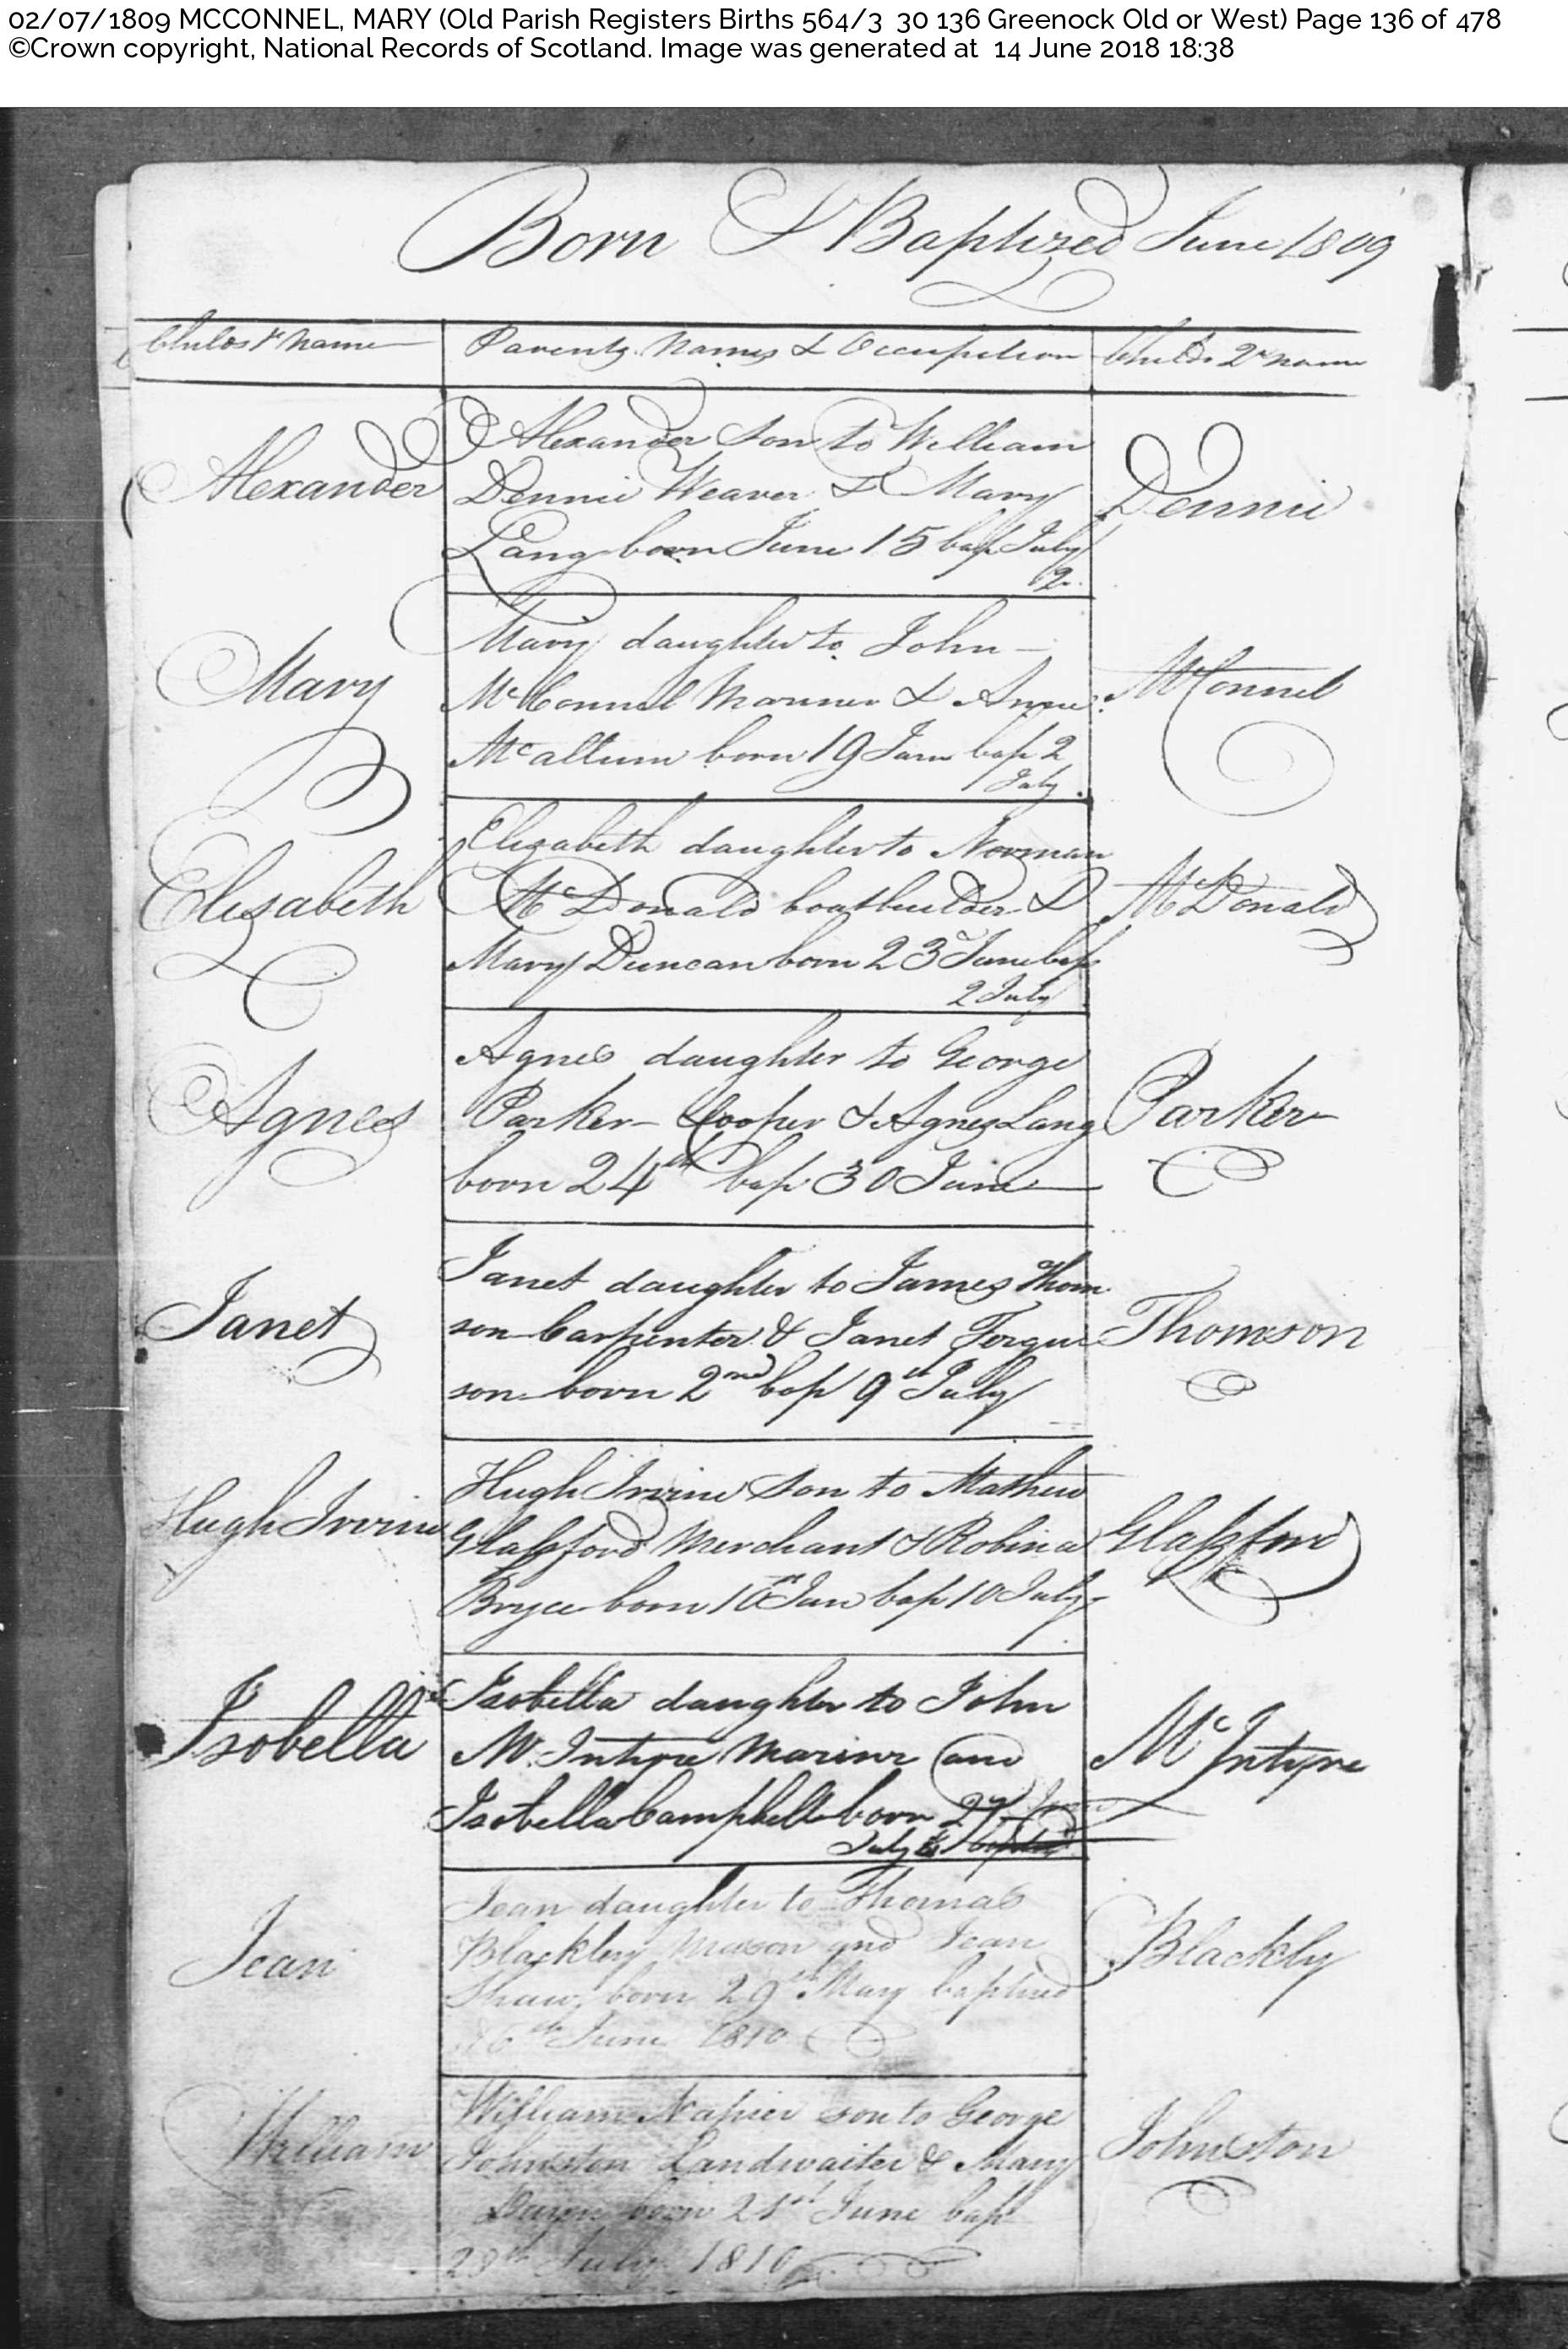 MaryConnell_B1809 Greenock, July 2, 1809, Linked To: <a href='i2561.html' >Ann McCallum</a> and <a href='i2558.html' >John Connell 🧬</a>